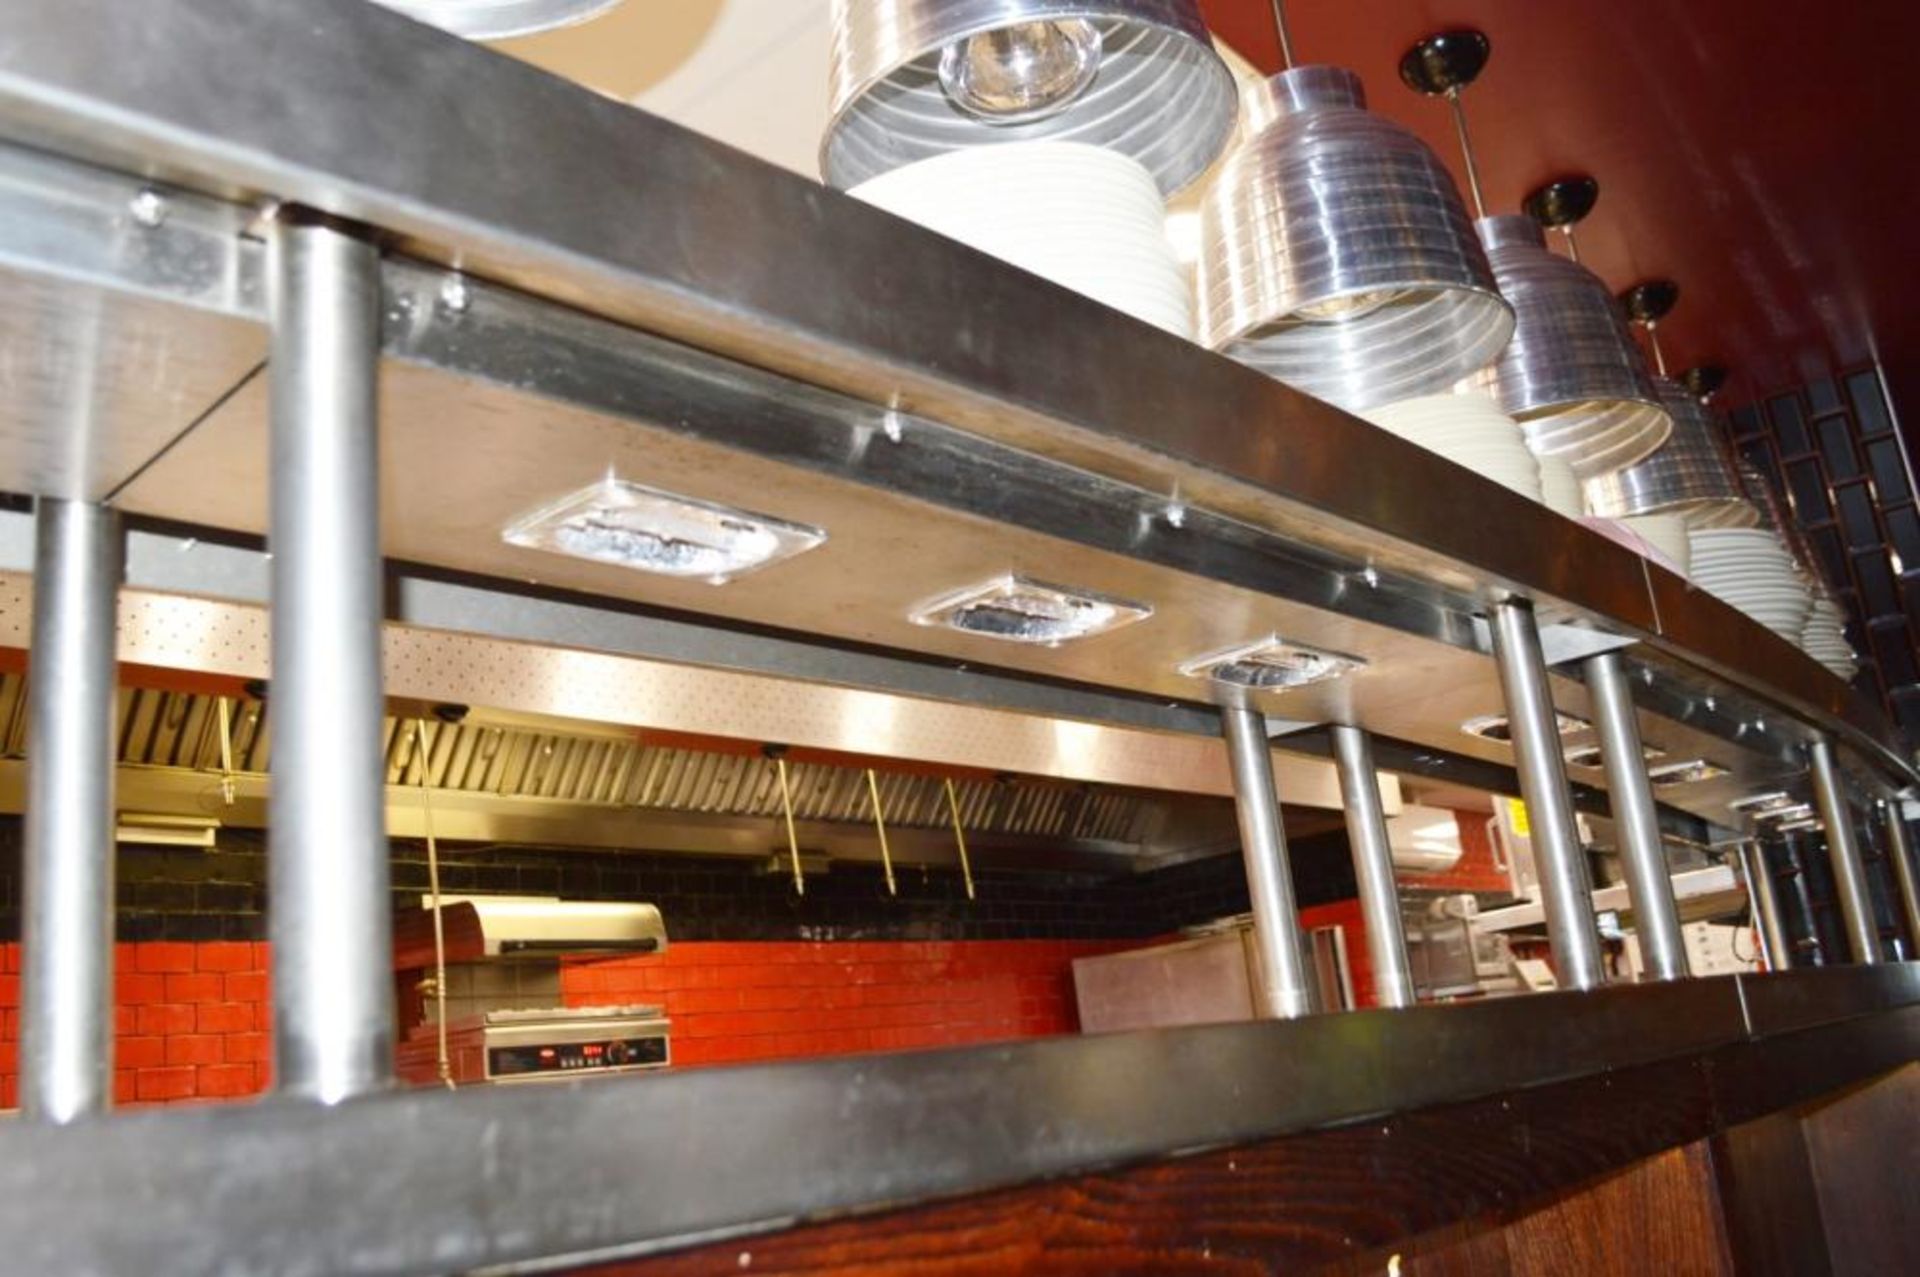 1 x Restaurant Food Collection Gantry Partition With Illuminated Display Shelves and Stainless Steel - Image 4 of 10